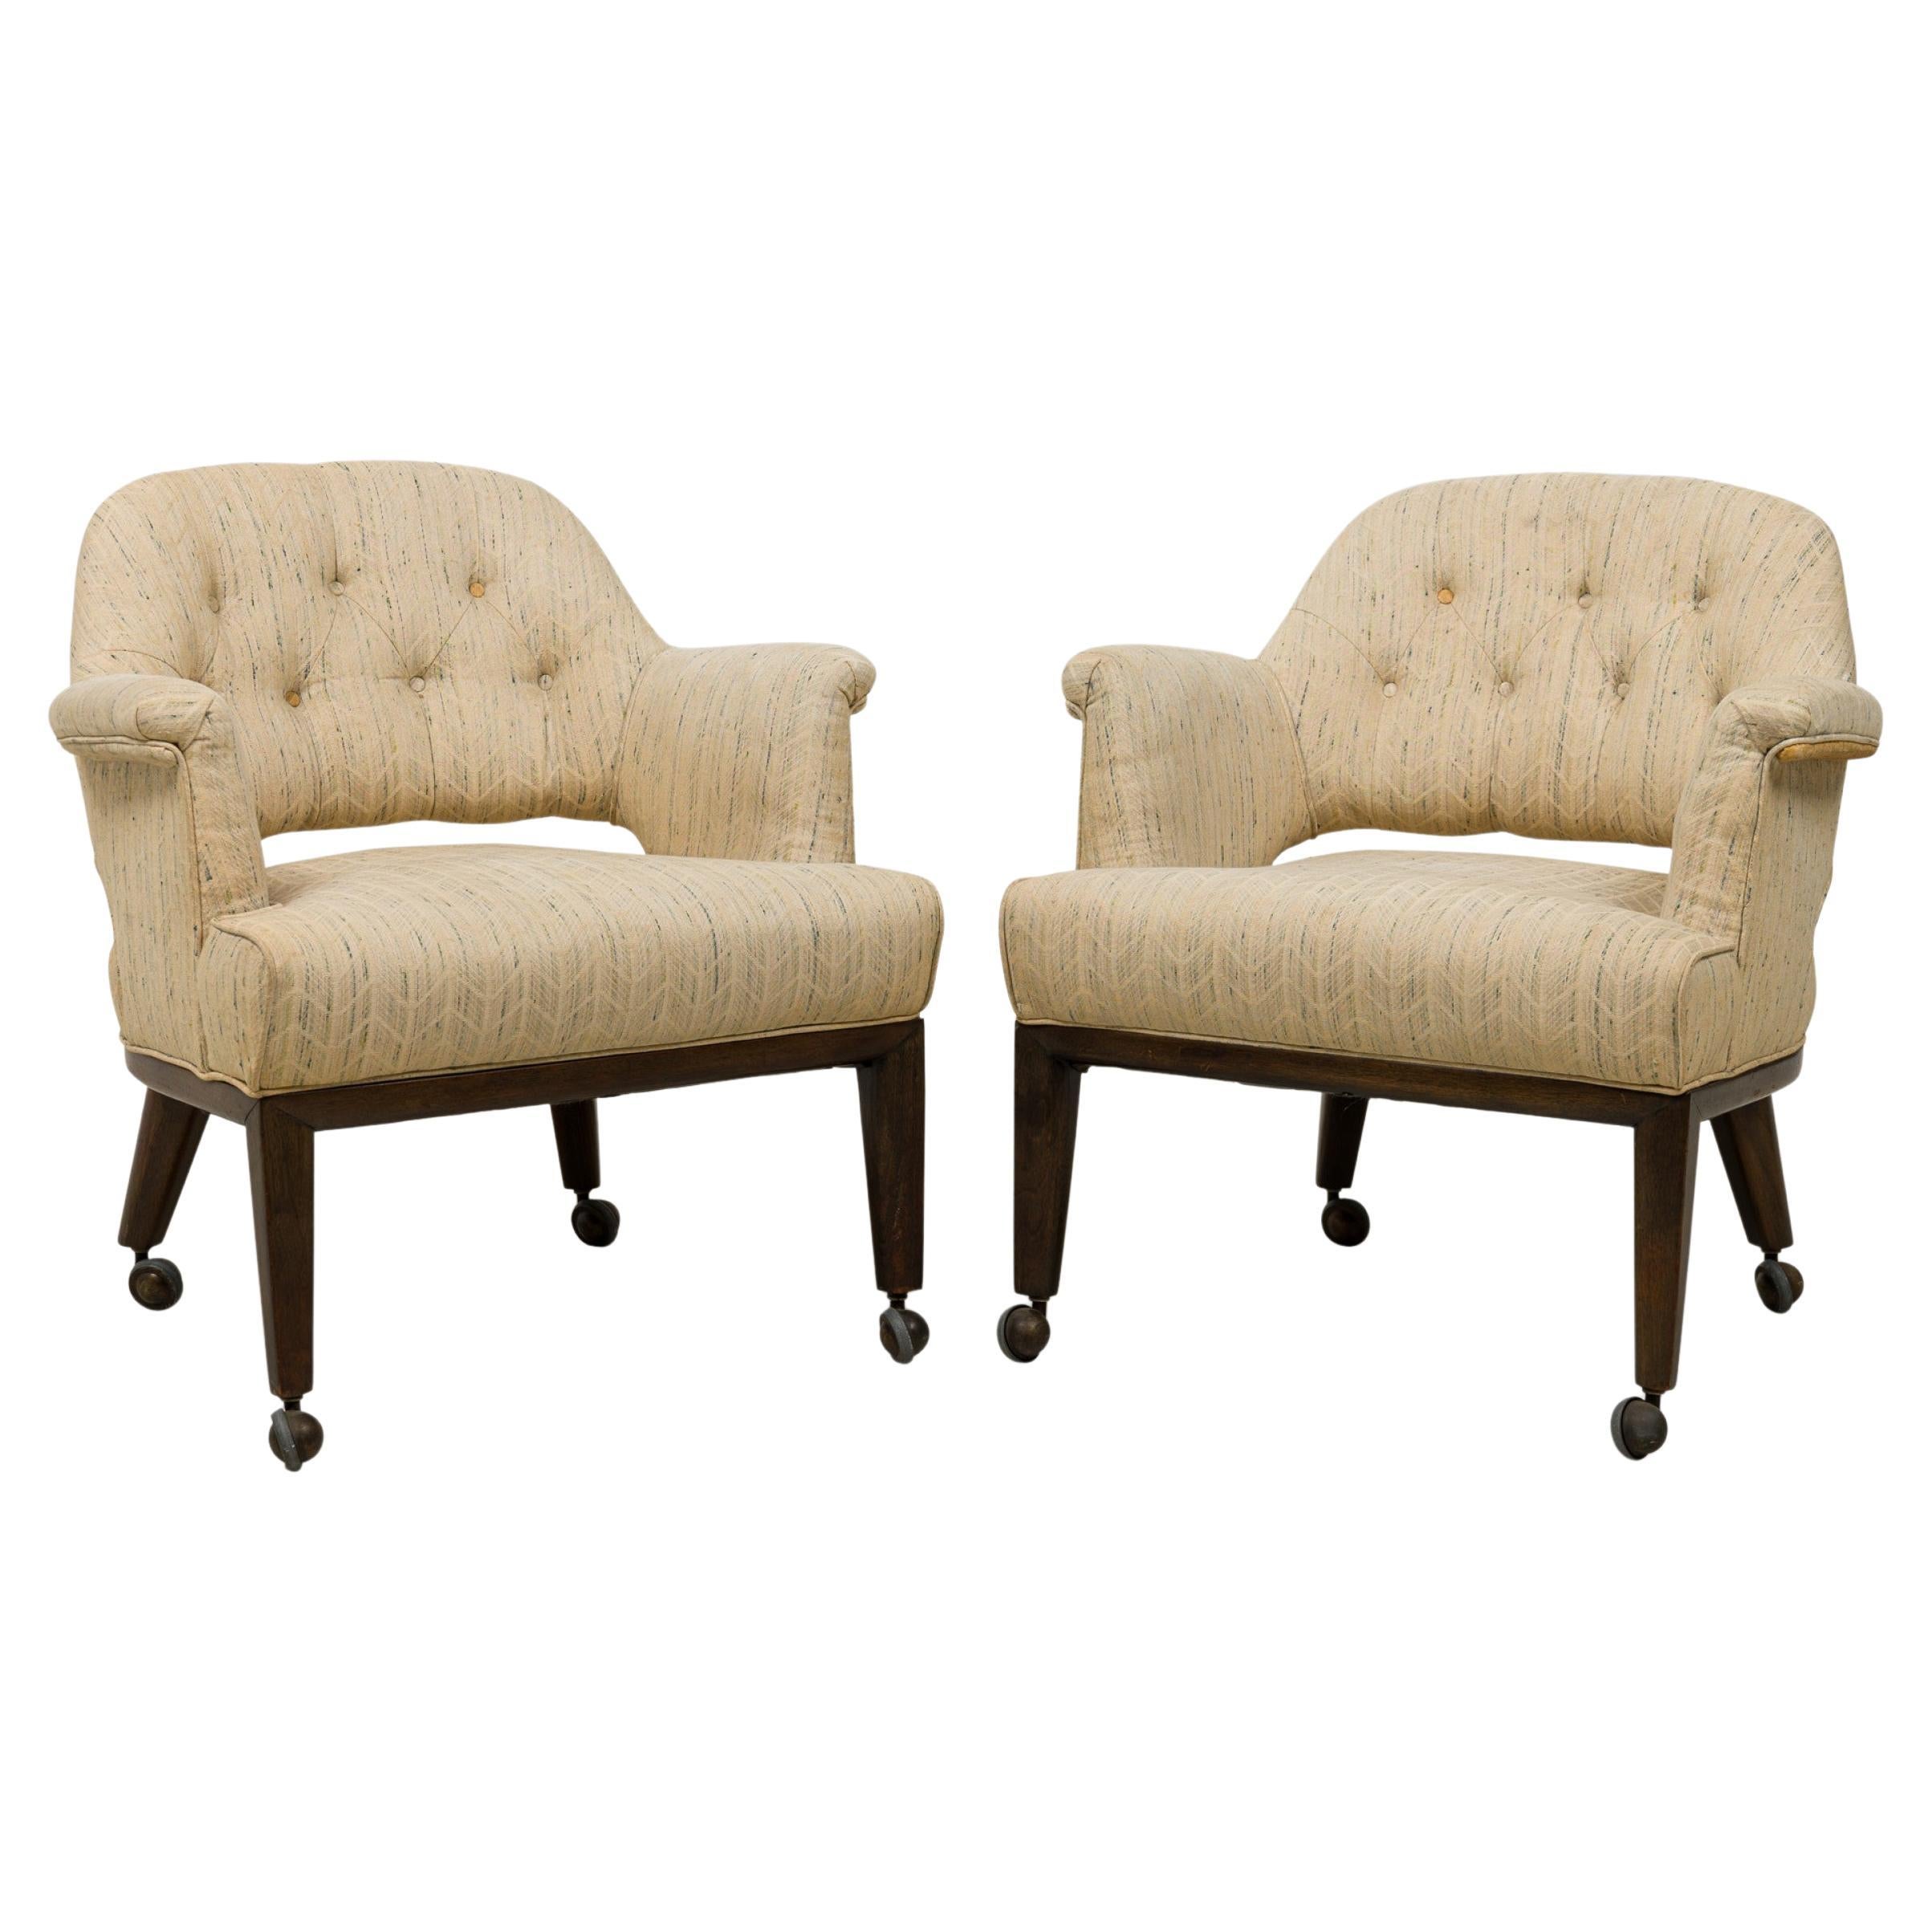 Set of 4 Dunbar Janus Armchairs in Beige Textured Weave Upholstery, Manner of Ed For Sale